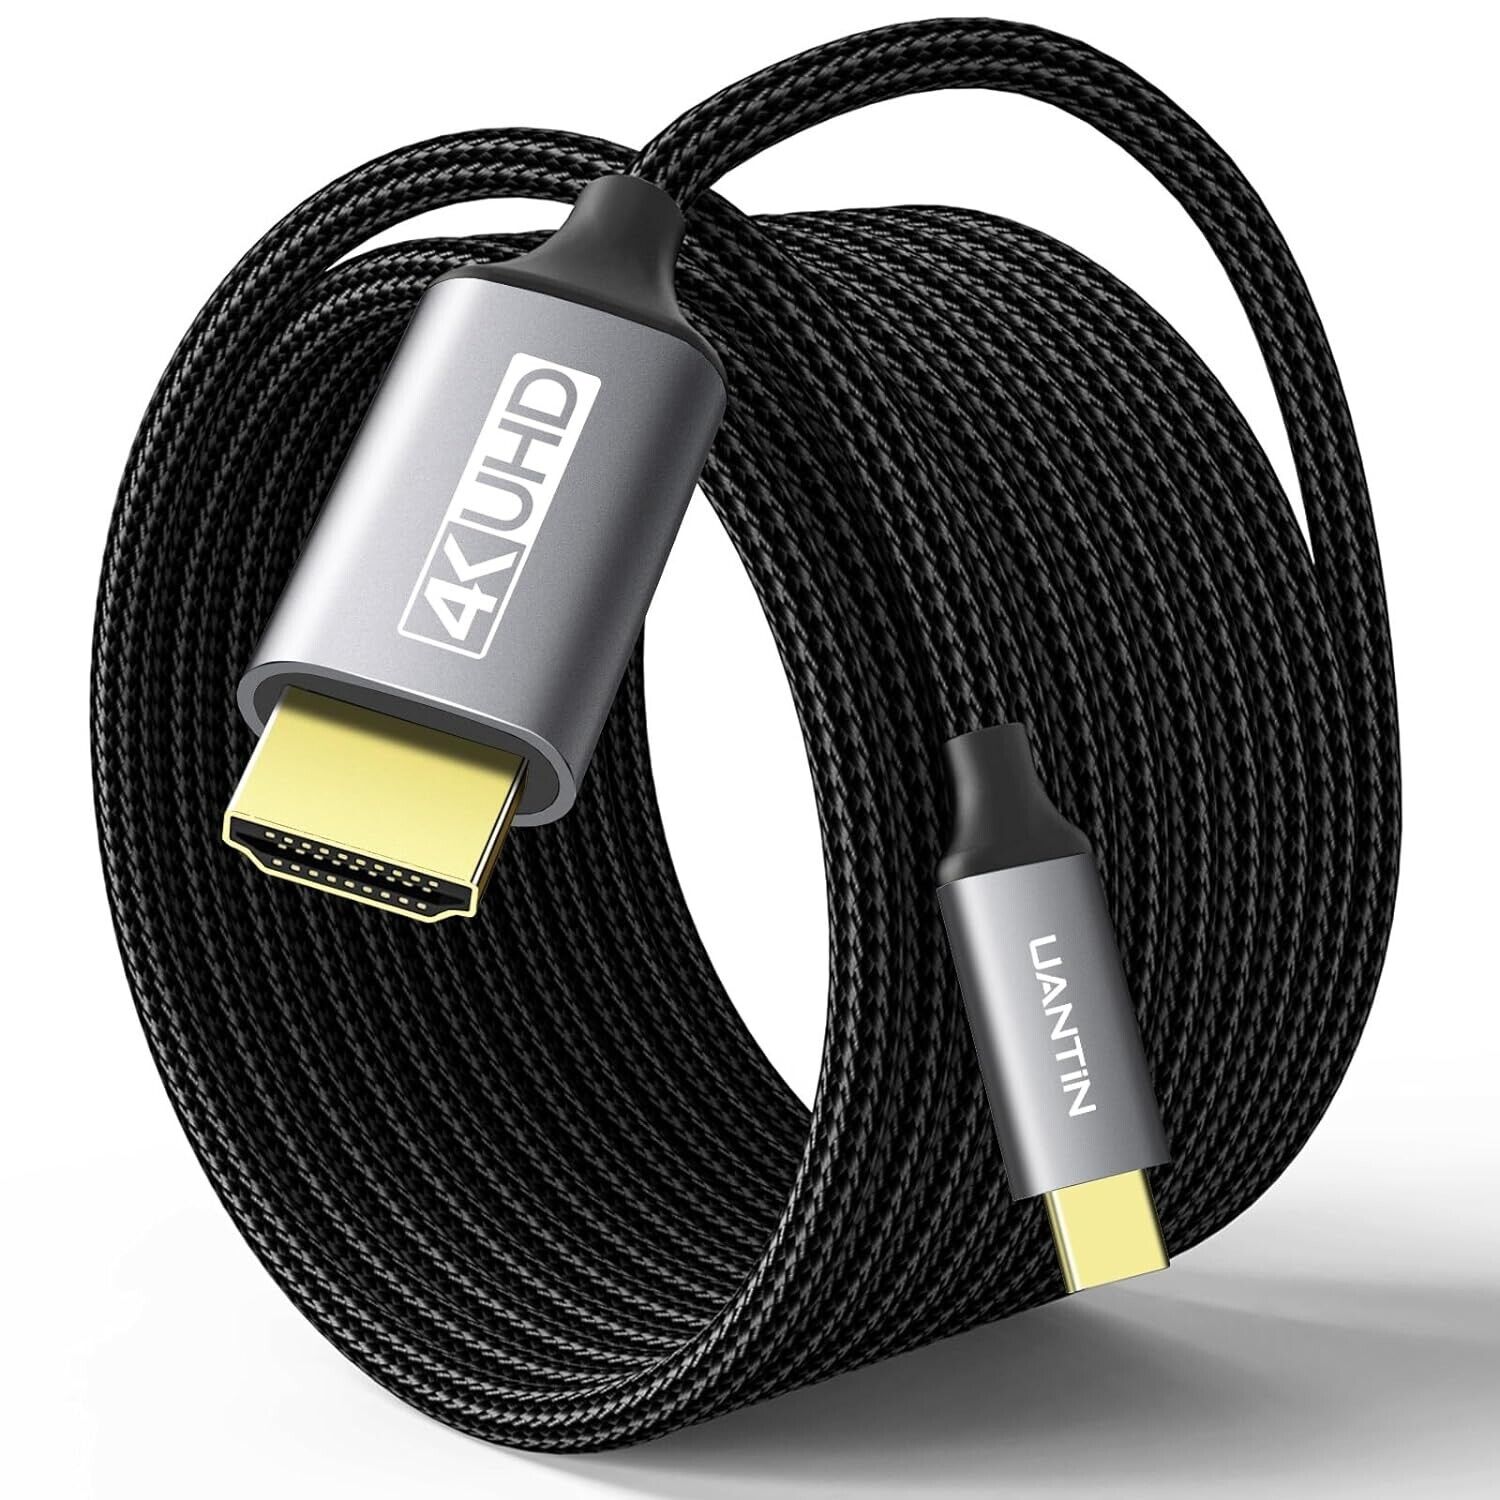 UANTIN USB C to HDMI Cable 10Ft | 4K High-Speed USB 3.1 Type-C to HDMI 2.0 Co...